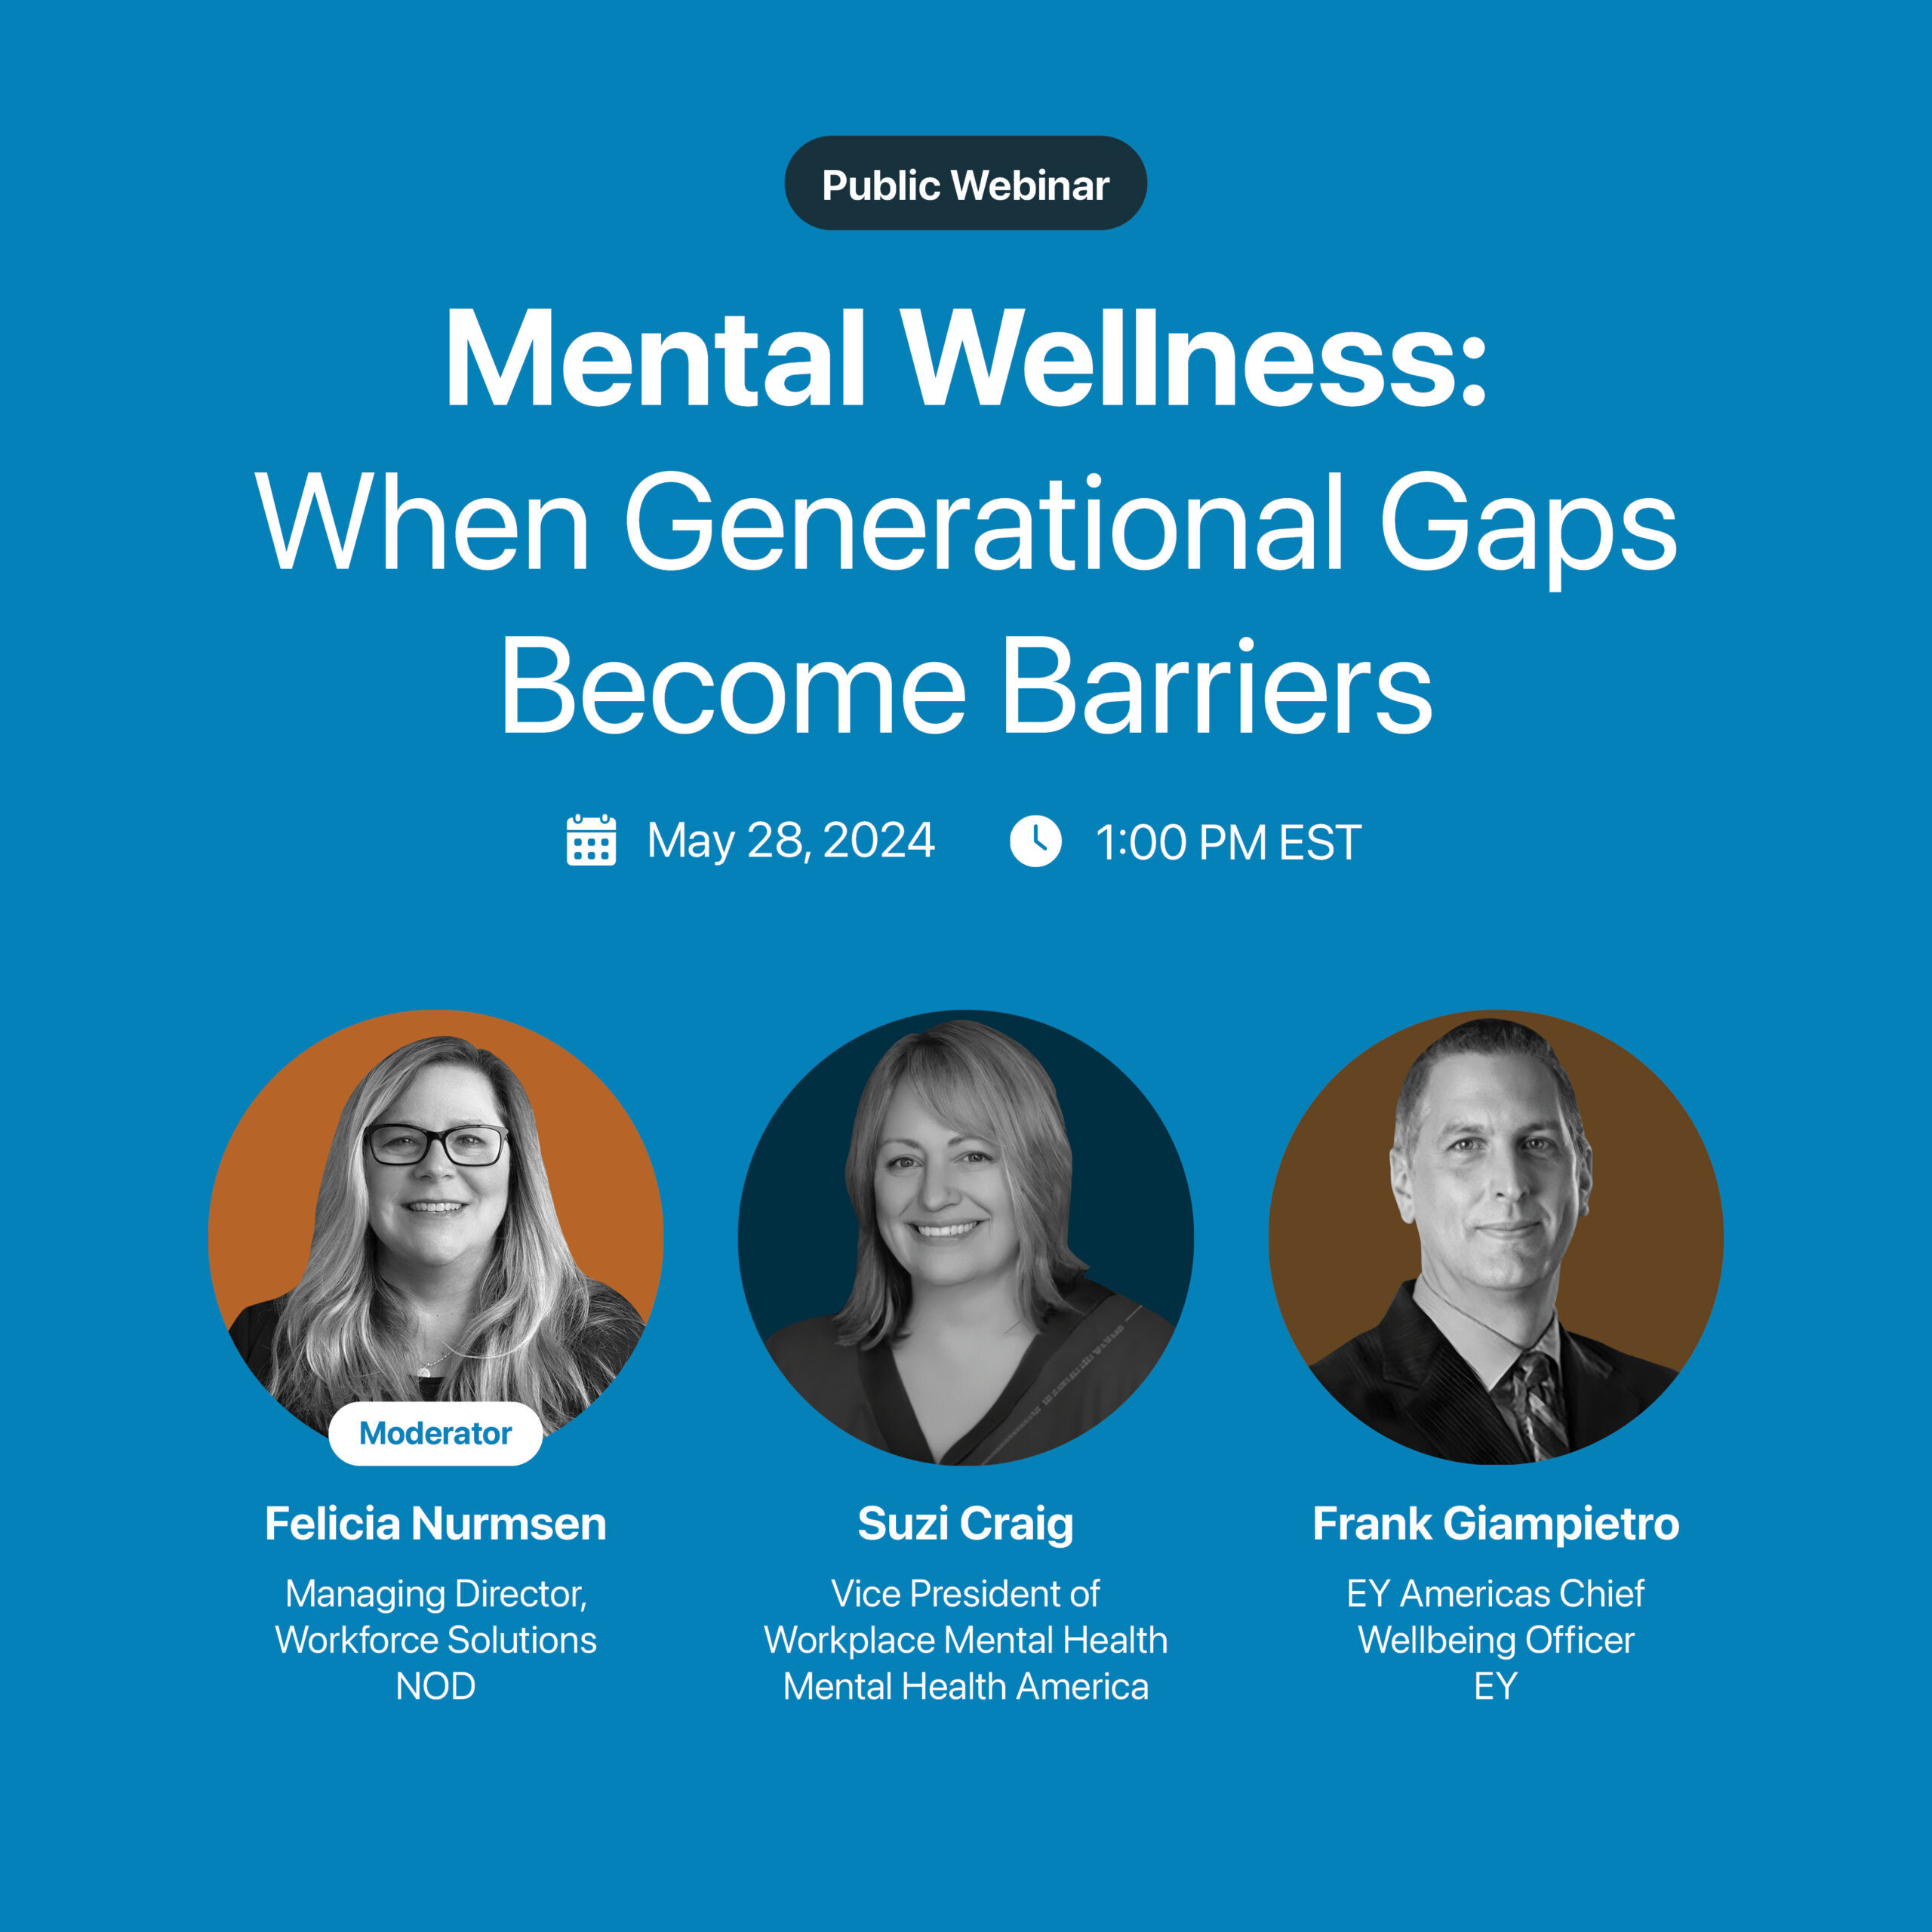 White text over blue background reads: "Public Webinar. Mental Wellness: When Generational Gaps Become Barriers. May 28, 2024. 1:00 PM EST." Beneath the date and time are three black and white headshots from left to right: "Moderator: Felicia Nurmsen. Managing Director, Workforce Solutions, NOD. @Suzi Craig, Vice President of Workplace Mental Health, Mental Health America. Frank Giampietro, EY Americas Chief Wellbeing Officer, EY"